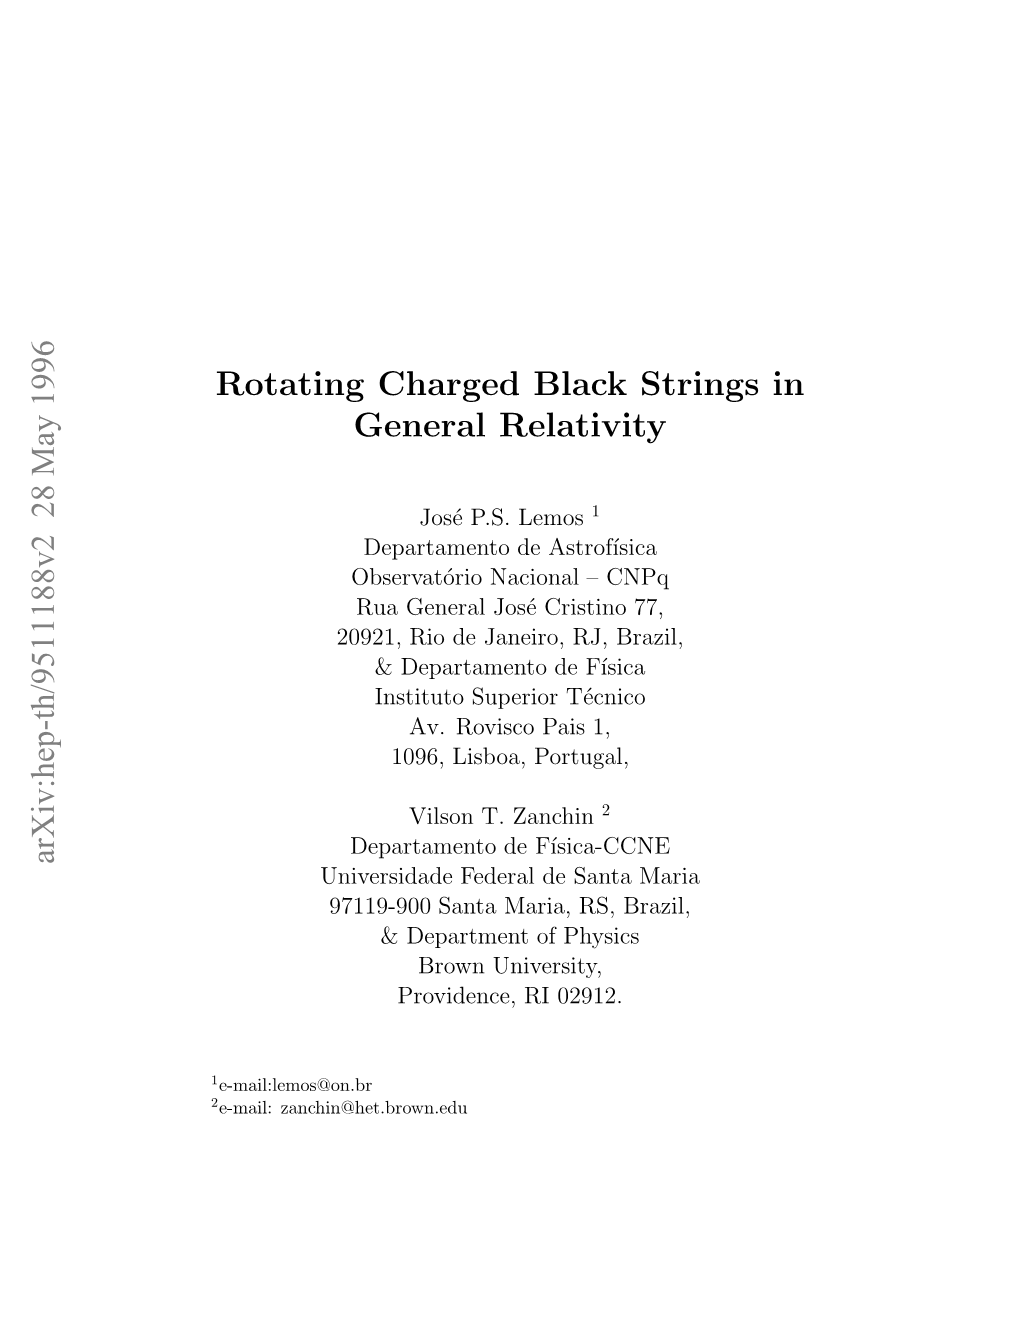 Rotating Charged Black Strings in General Relativity